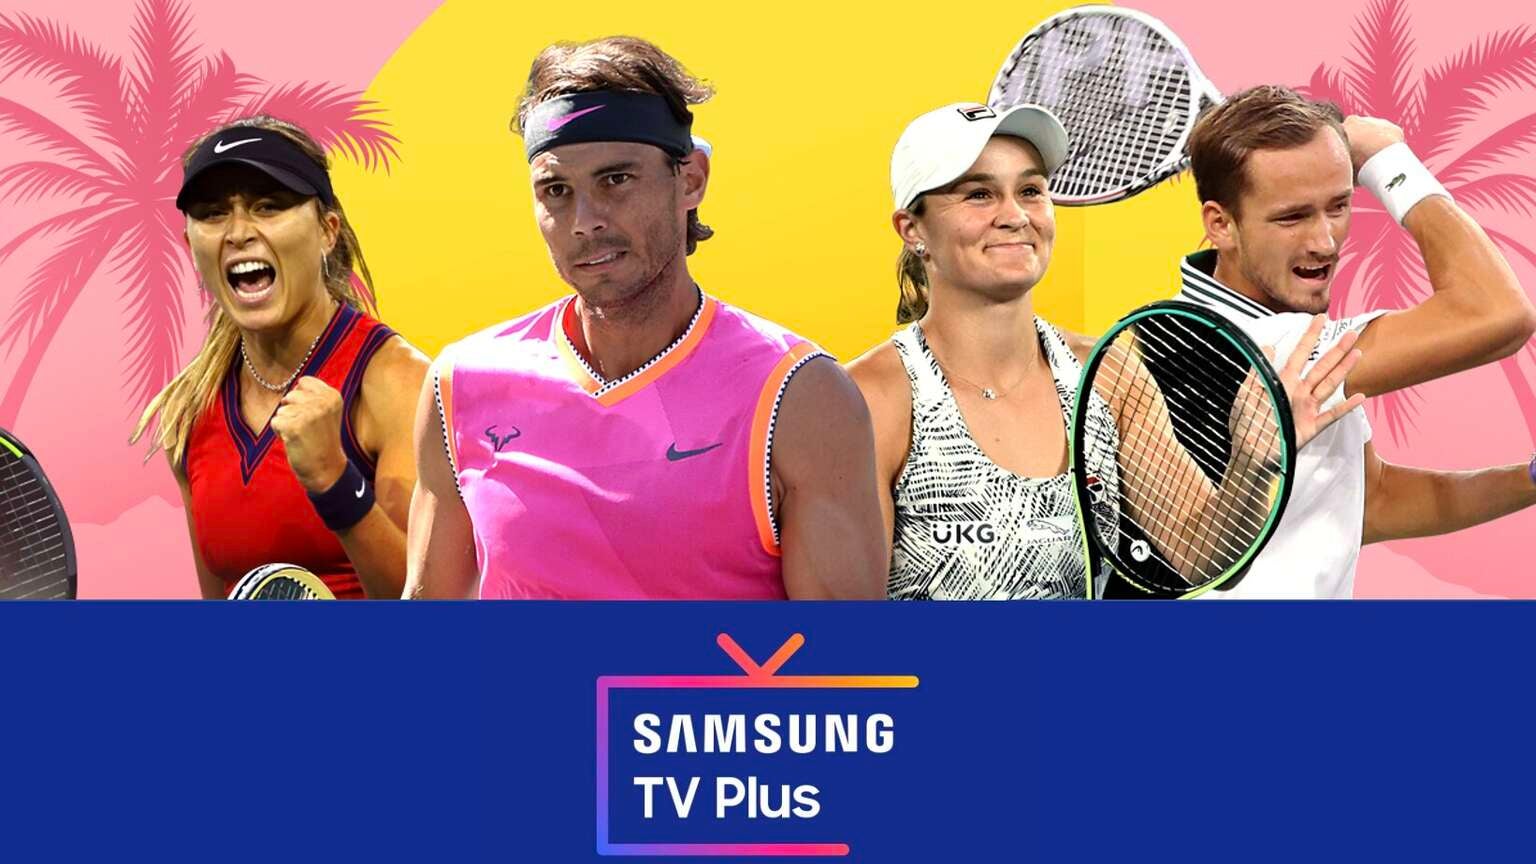 pv sindhu match today live time and channel